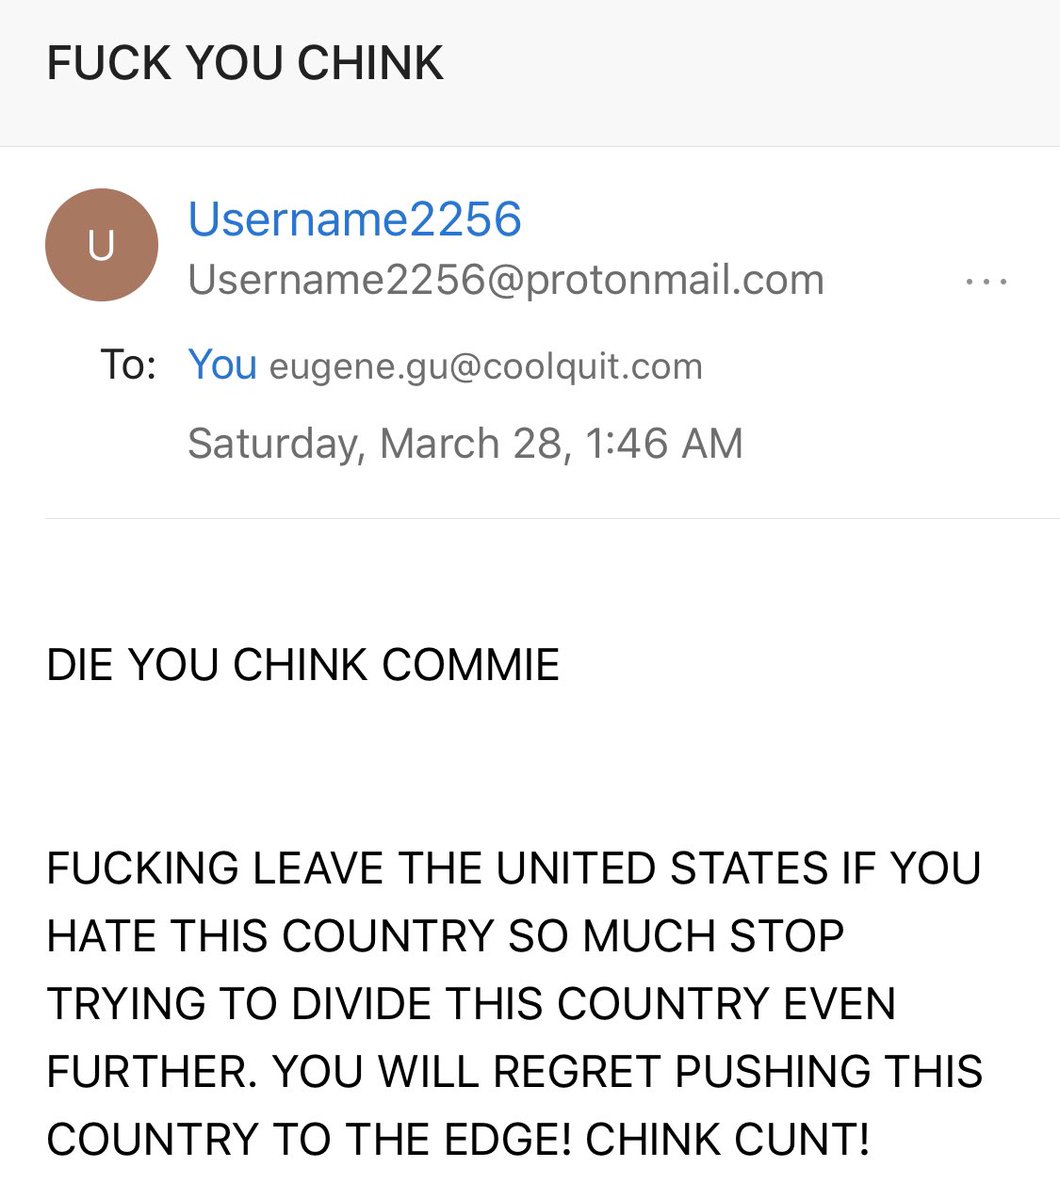 Imagine providing free telemedicine services to fight the coronavirus pandemic and leaving your email address public for that exact purpose only to be subjected to a bunch of racist death threats by cowards using anonymous email services they think can’t be traced back to them.